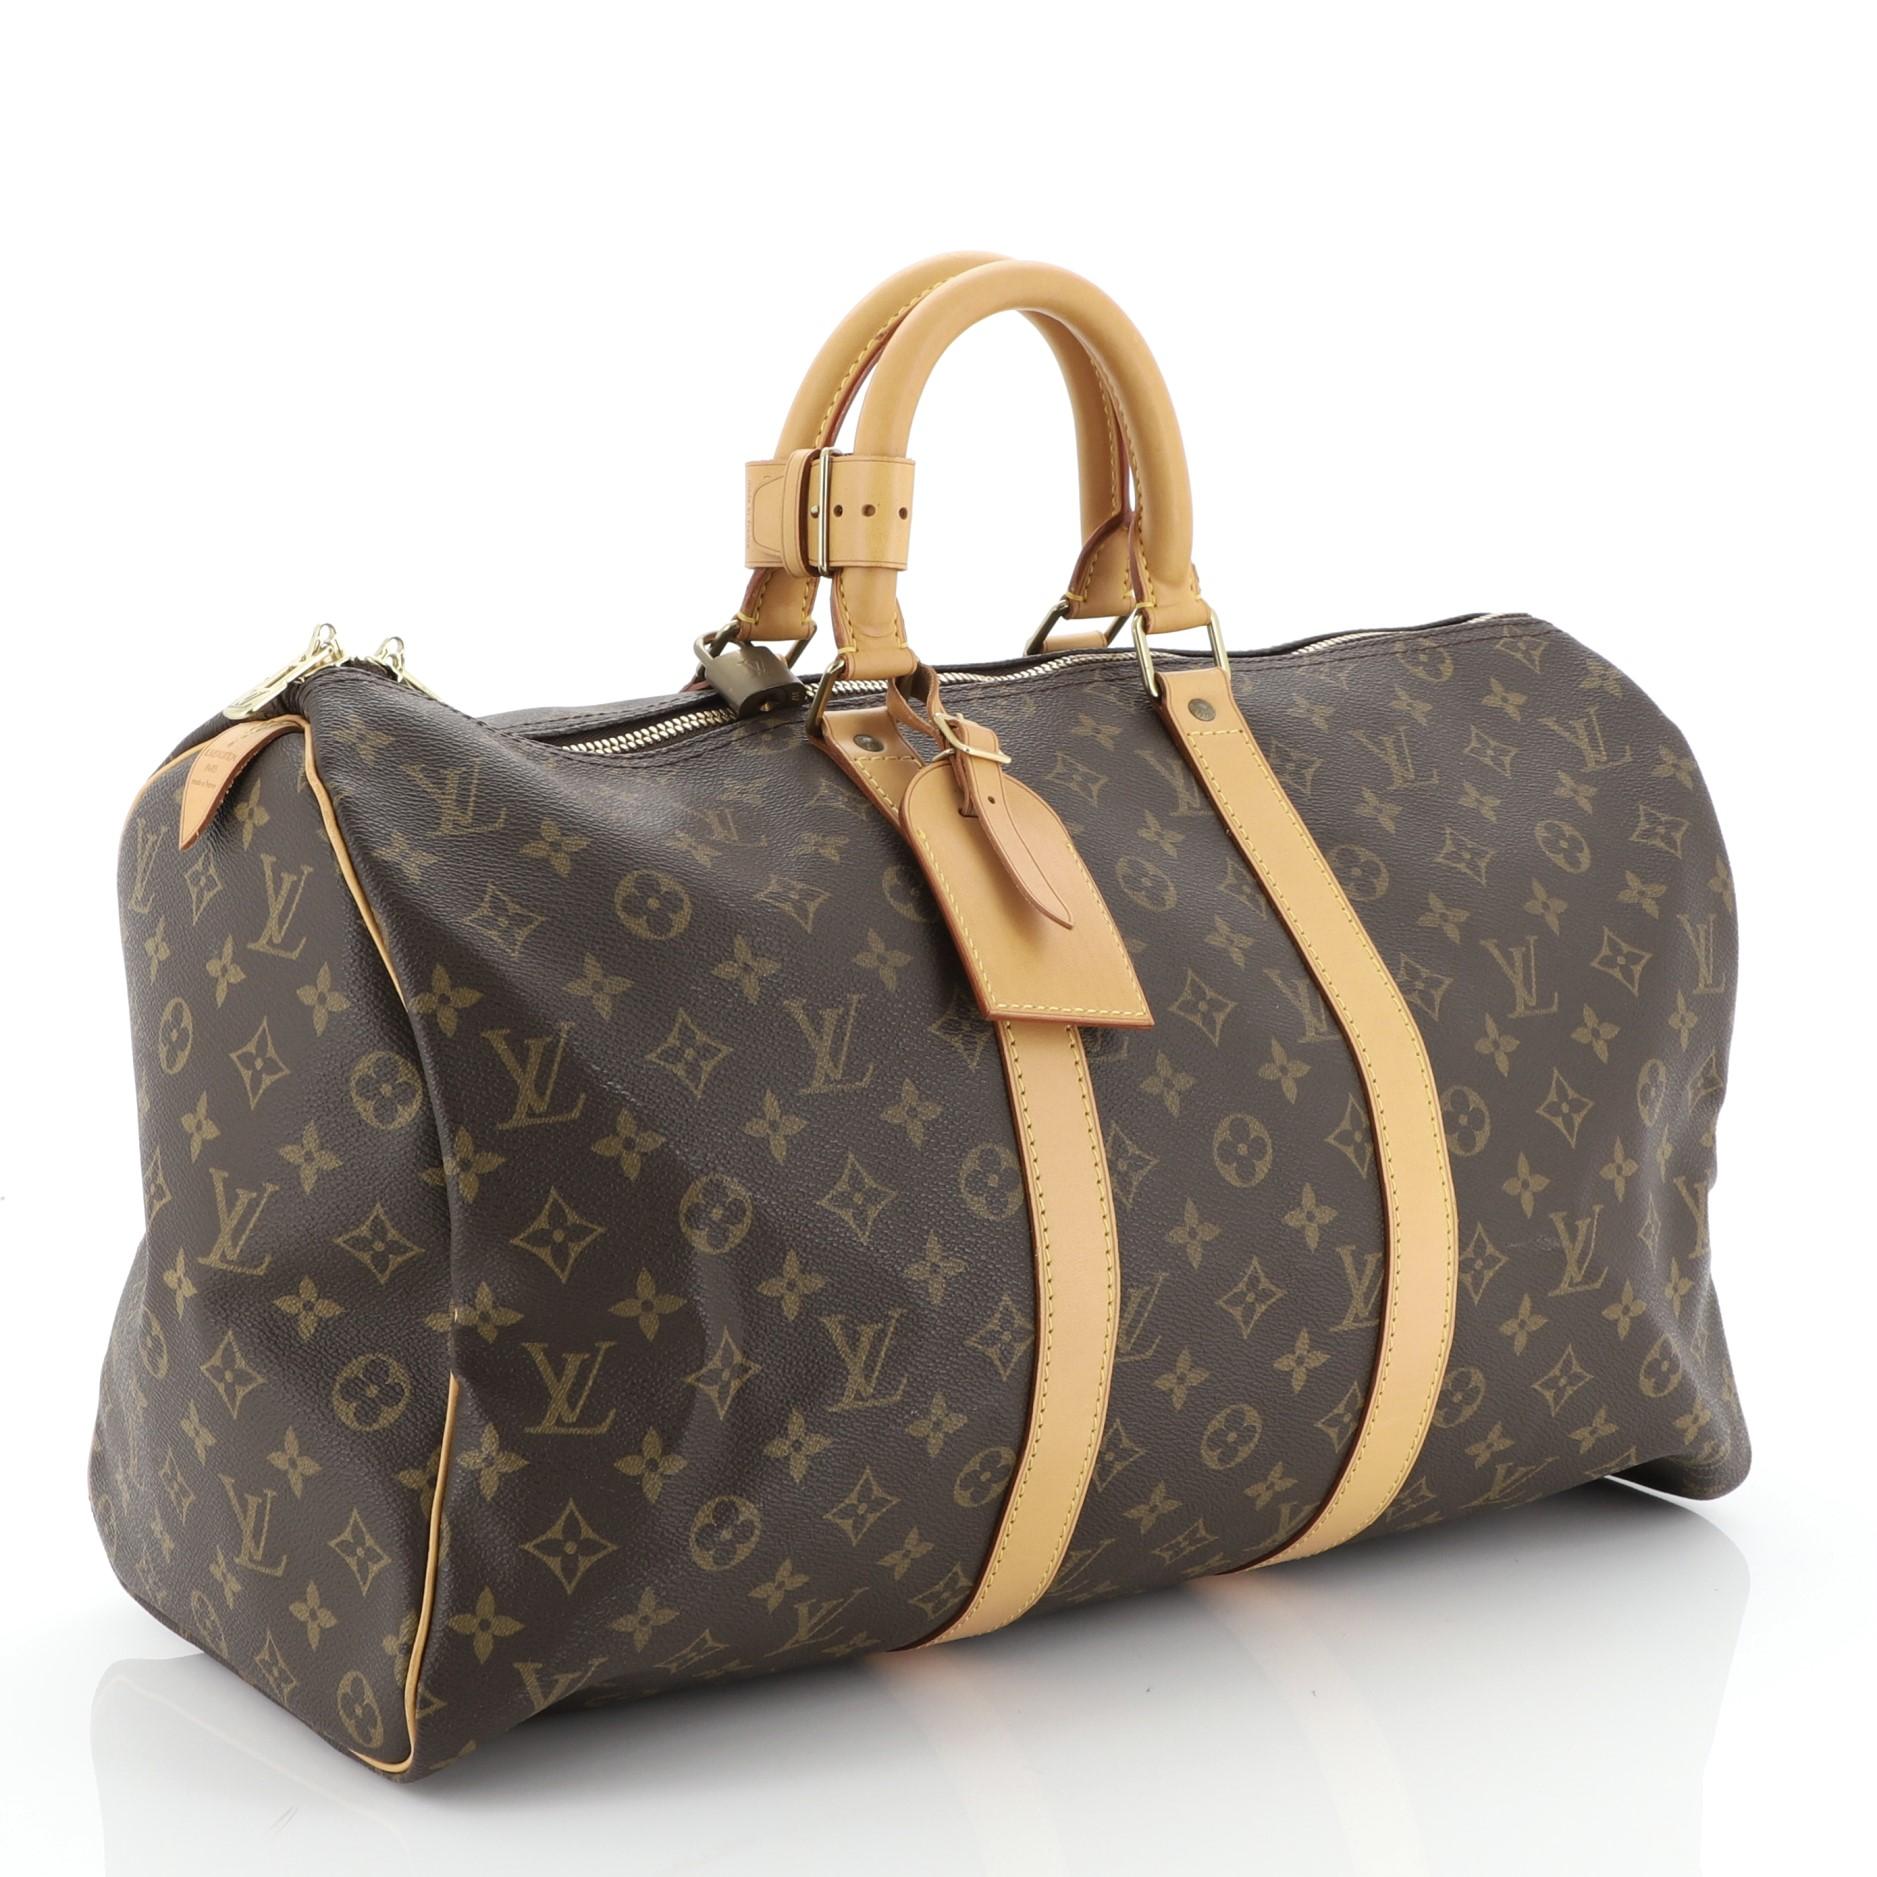 This Louis Vuitton Keepall Bag Monogram Canvas 45, crafted in brown monogram coated canvas, features dual rolled leather handles, vachetta leather trim, and gold-tone hardware. Its two-way zip closure opens to a brown fabric interior. Authenticity